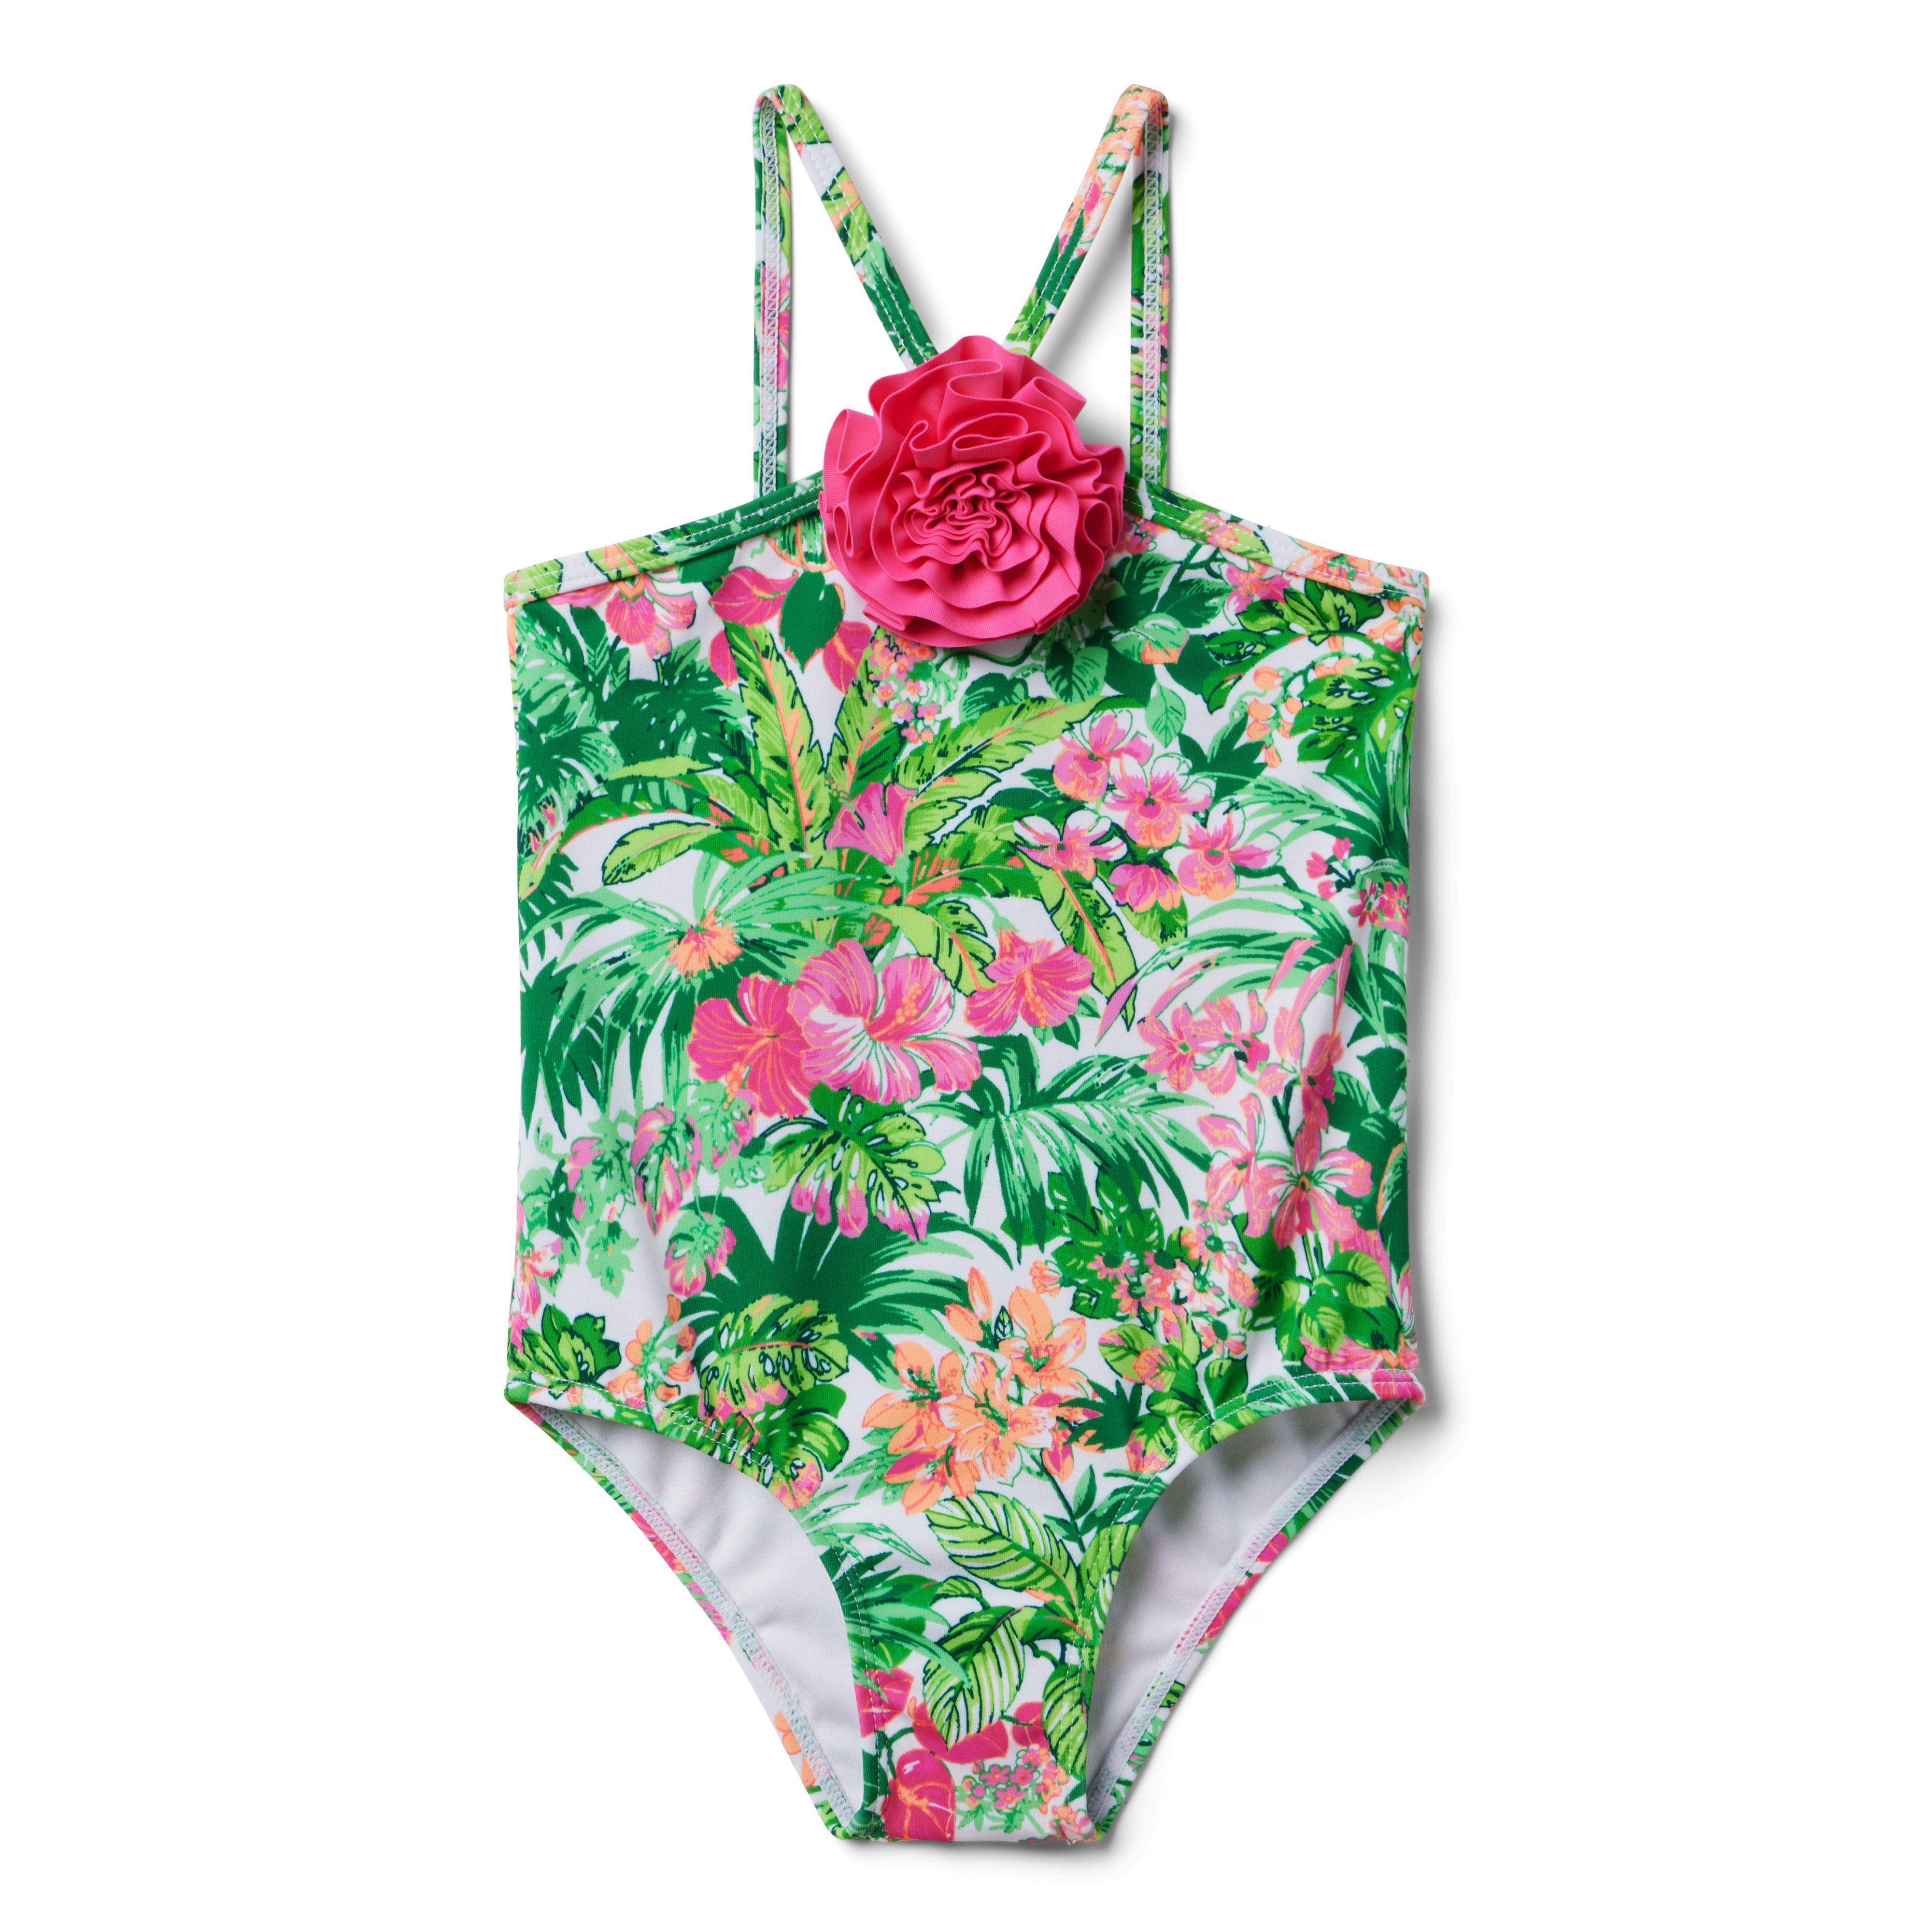 Girls and Newborn One-piece Swimsuits at Janie and Jack